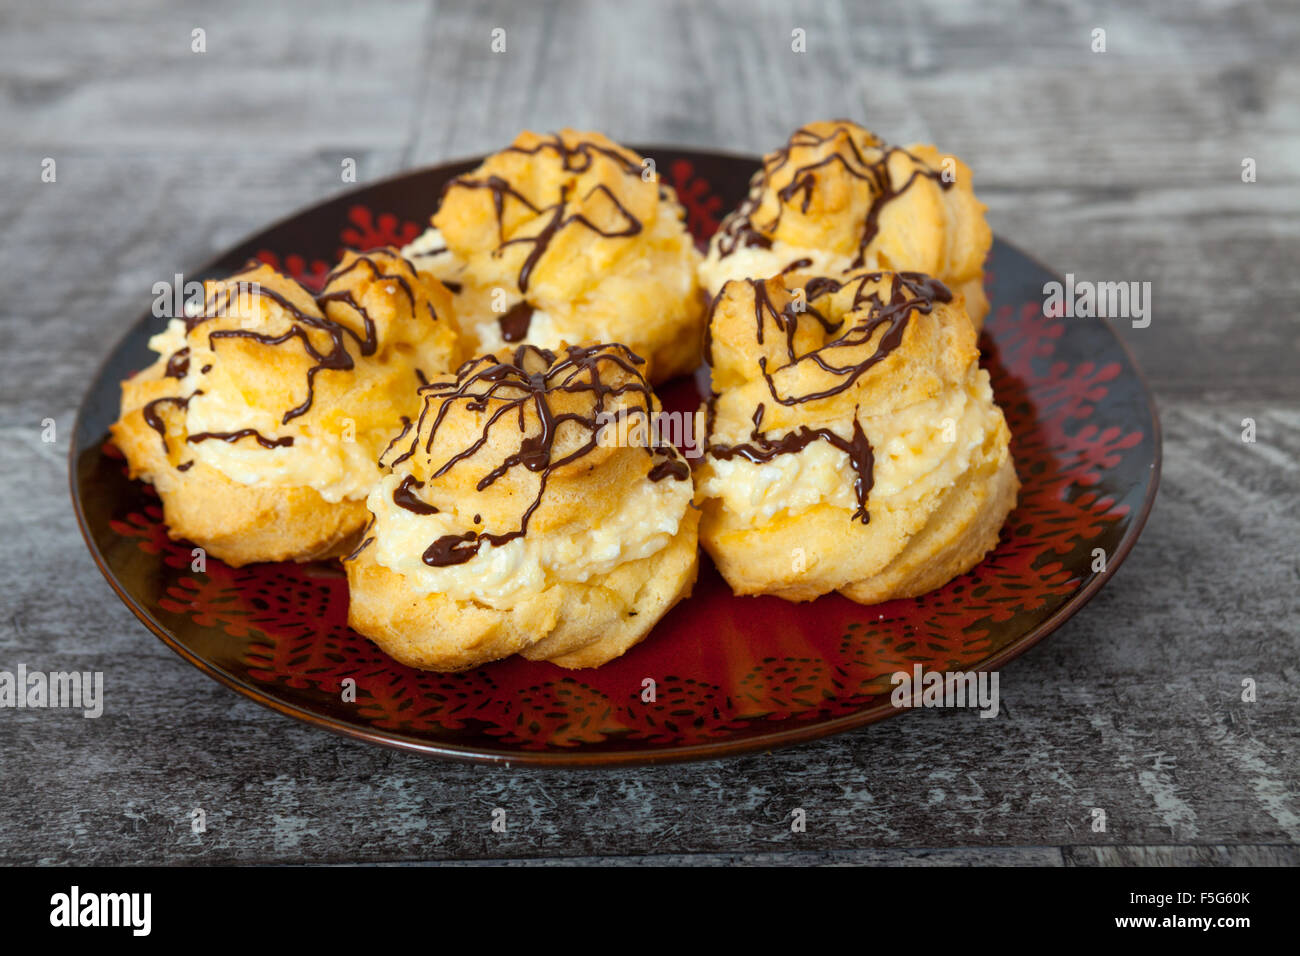 Cream puffs filled with pastry cream and sprinkled with Chocolate Stock Photo